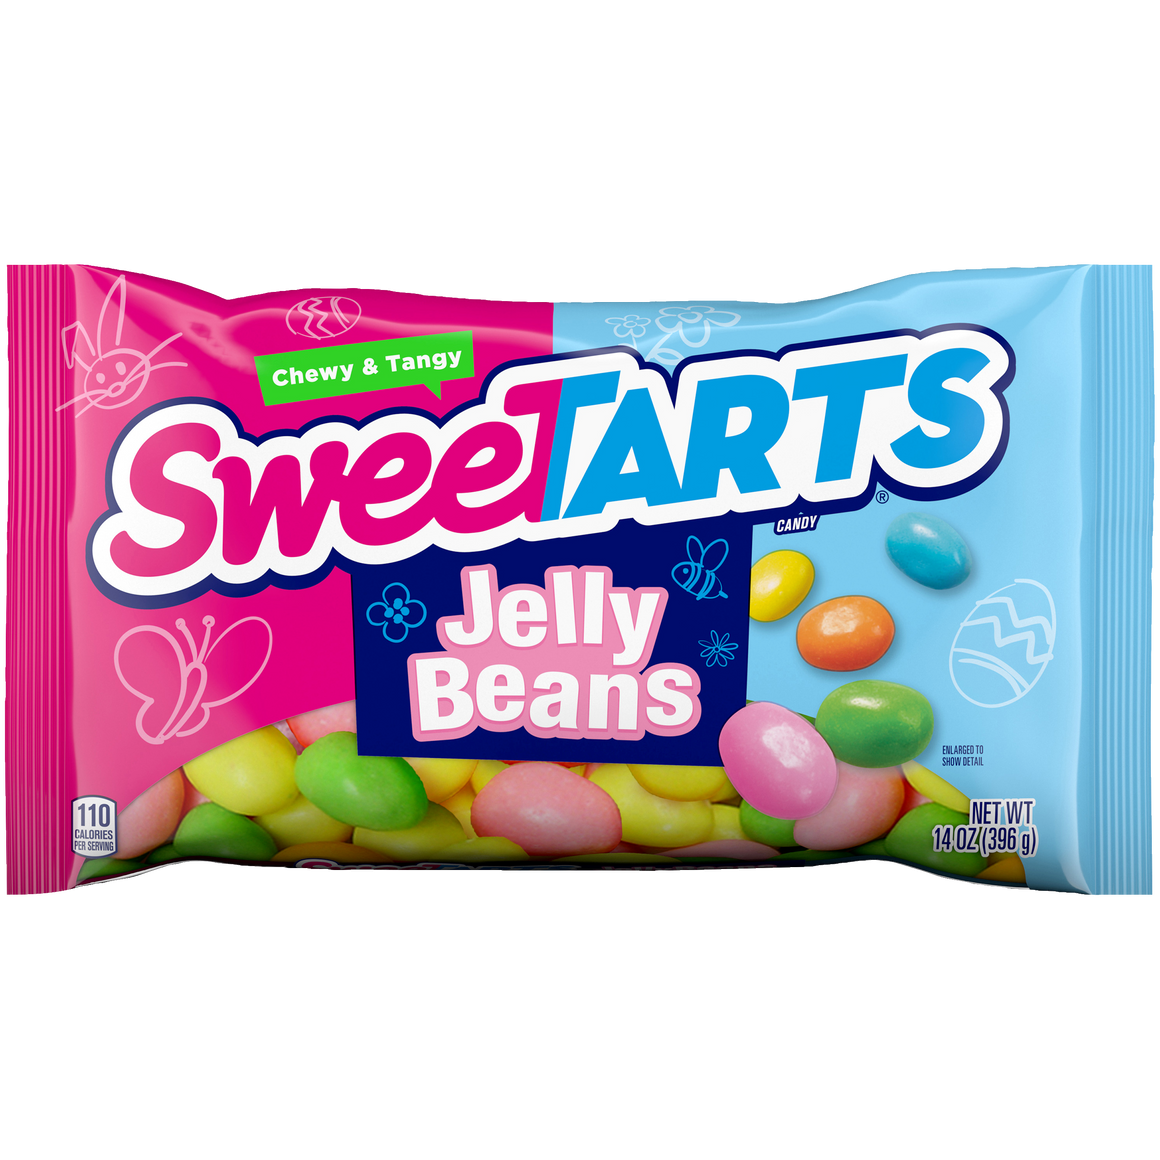 All City Candy SweeTARTS Jelly Beans - 14-oz. Bag Easter Ferrara Candy Company For fresh candy and great service, visit www.allcitycandy.com